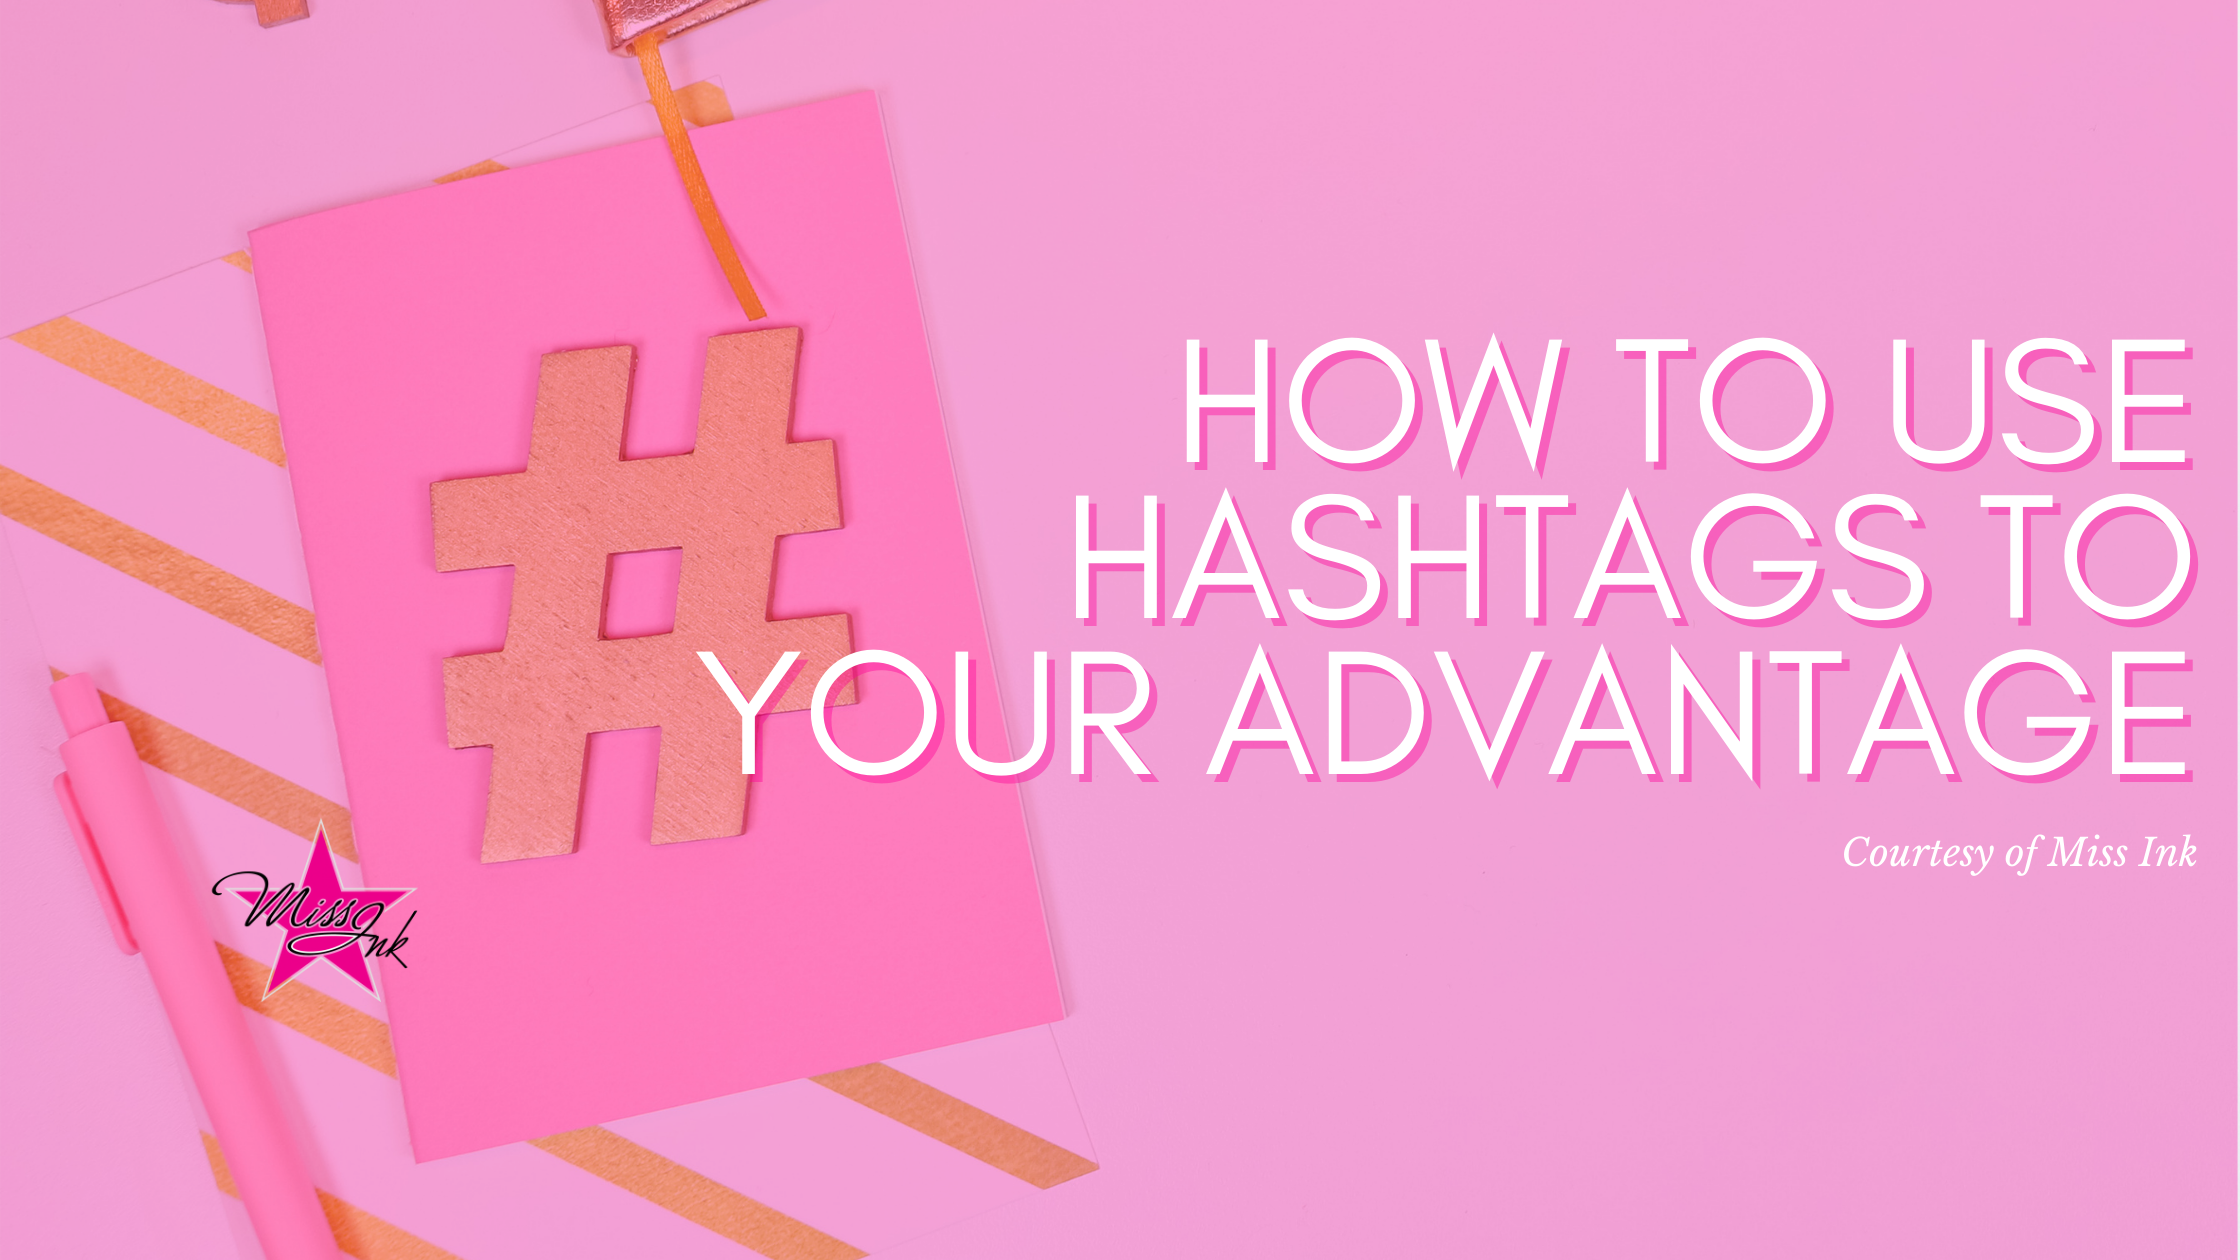 How To Use Hashtags To Your Advantage.